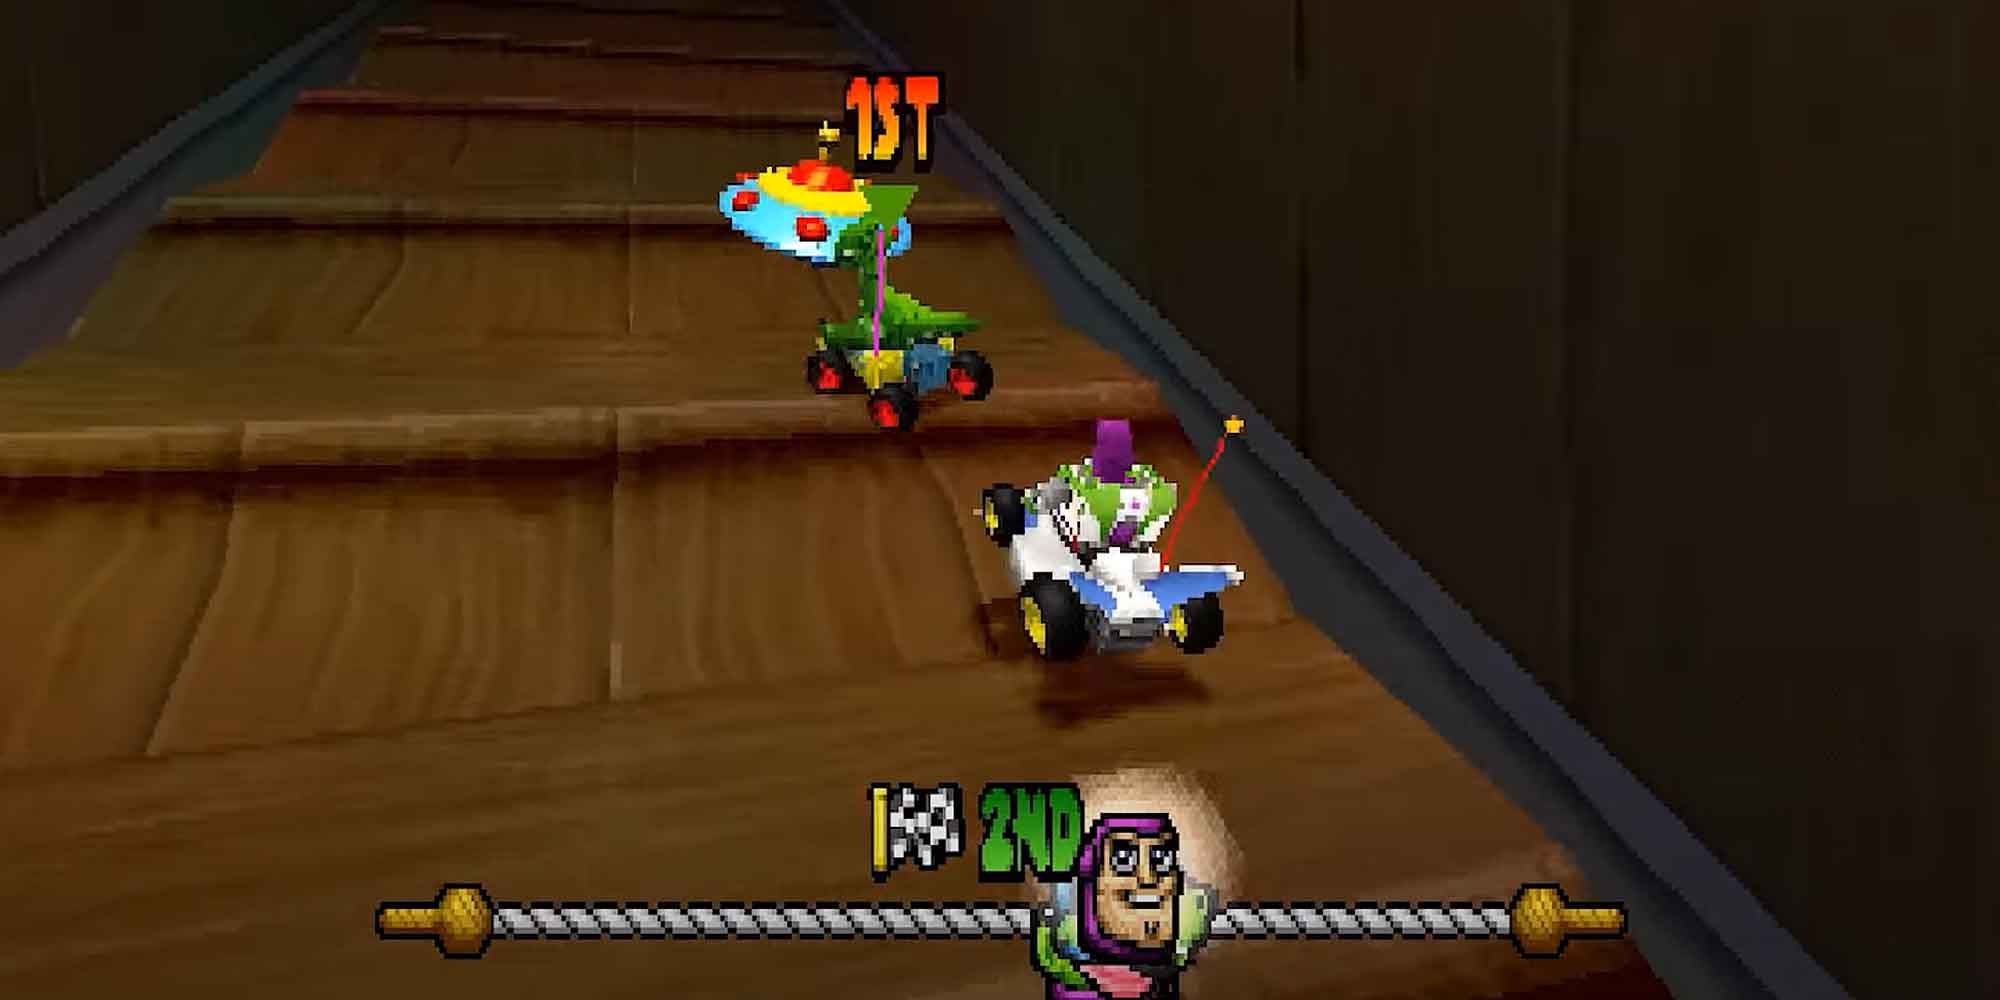 Buzz Lightyear about to pass the lead kart in the Toy Story Racer Disney Game